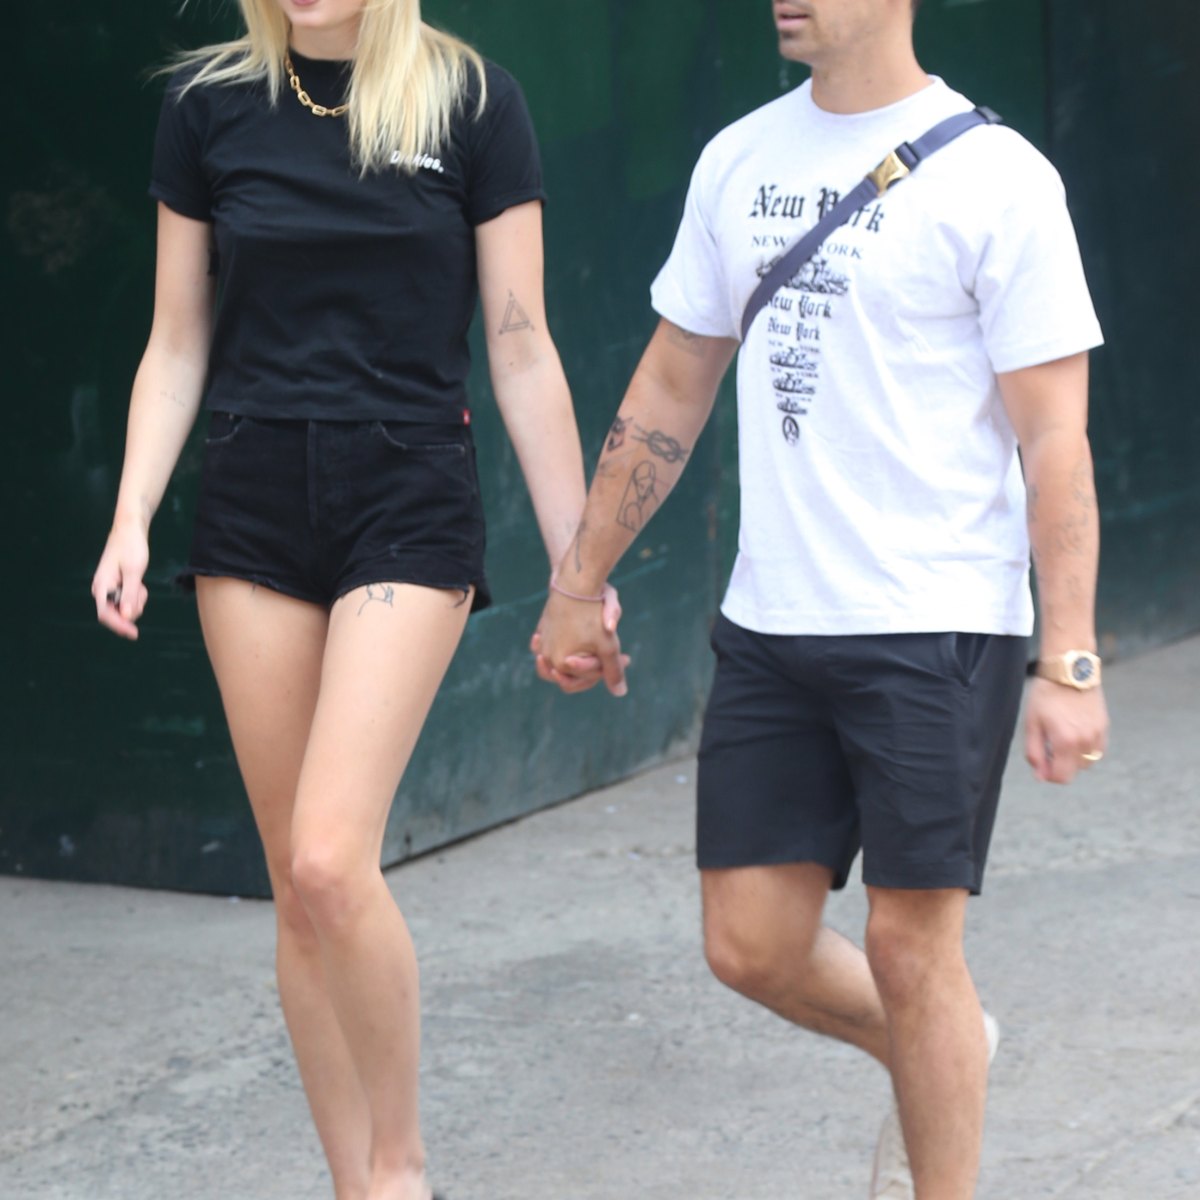 Sophie Turner and her husband Joe Jonas are stylishly casual as they hold  hands for an outing in NYC